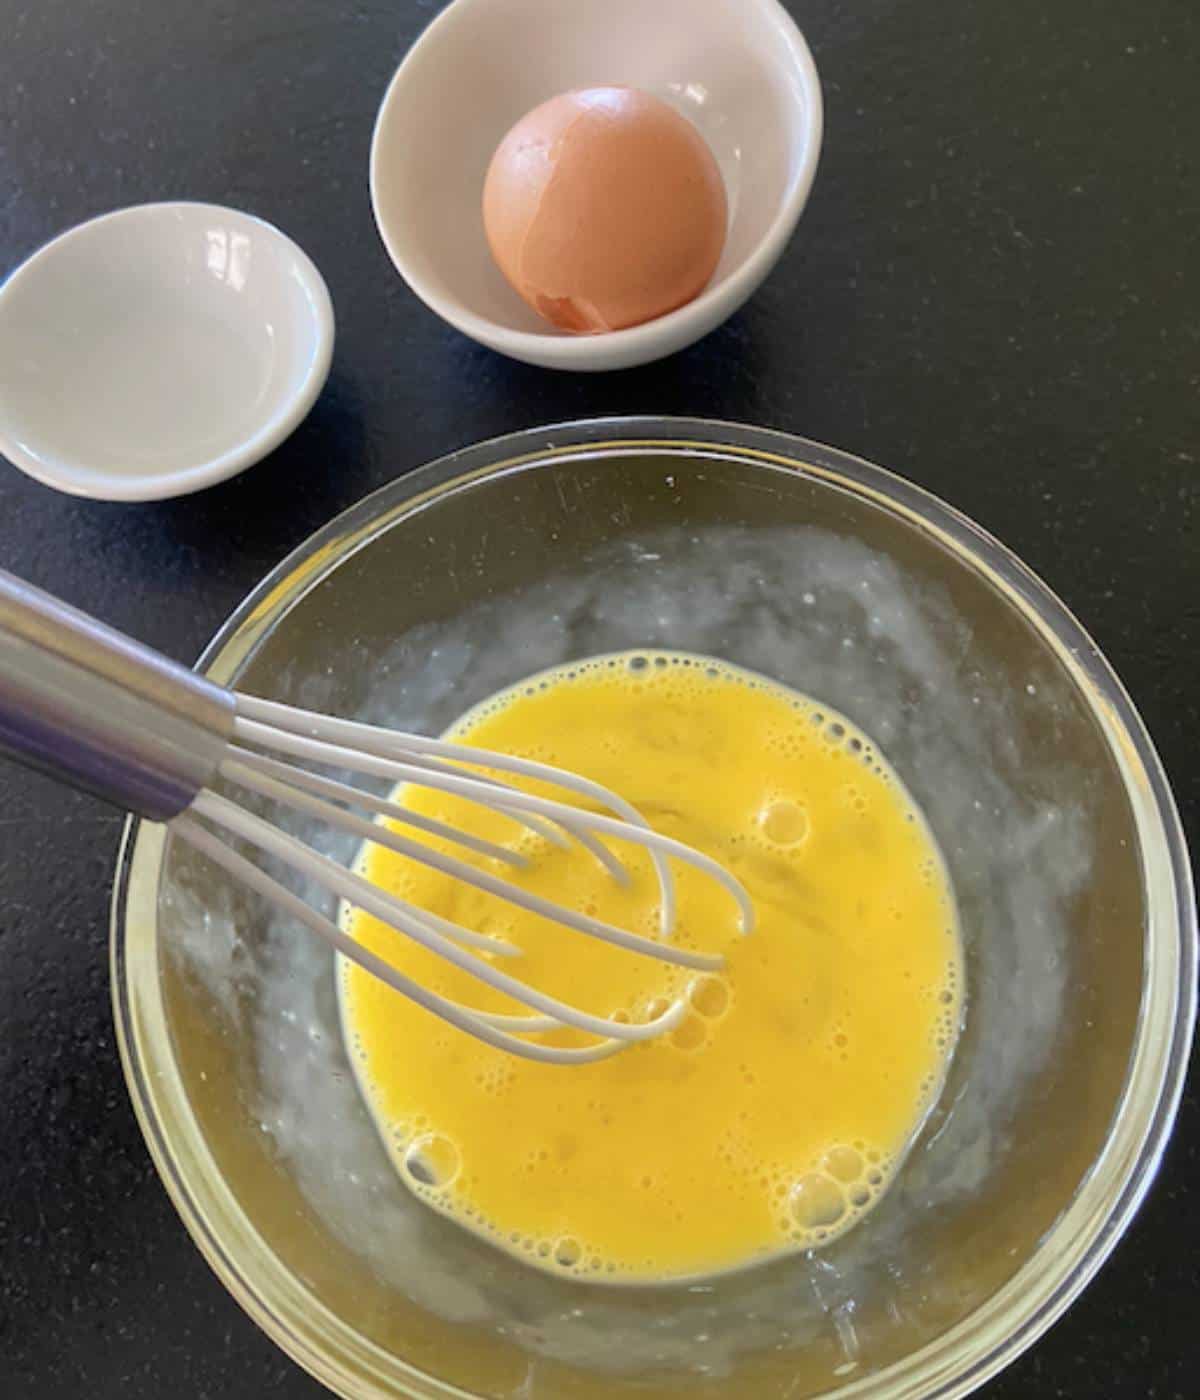 Egg wash in glass bowl with whisk.